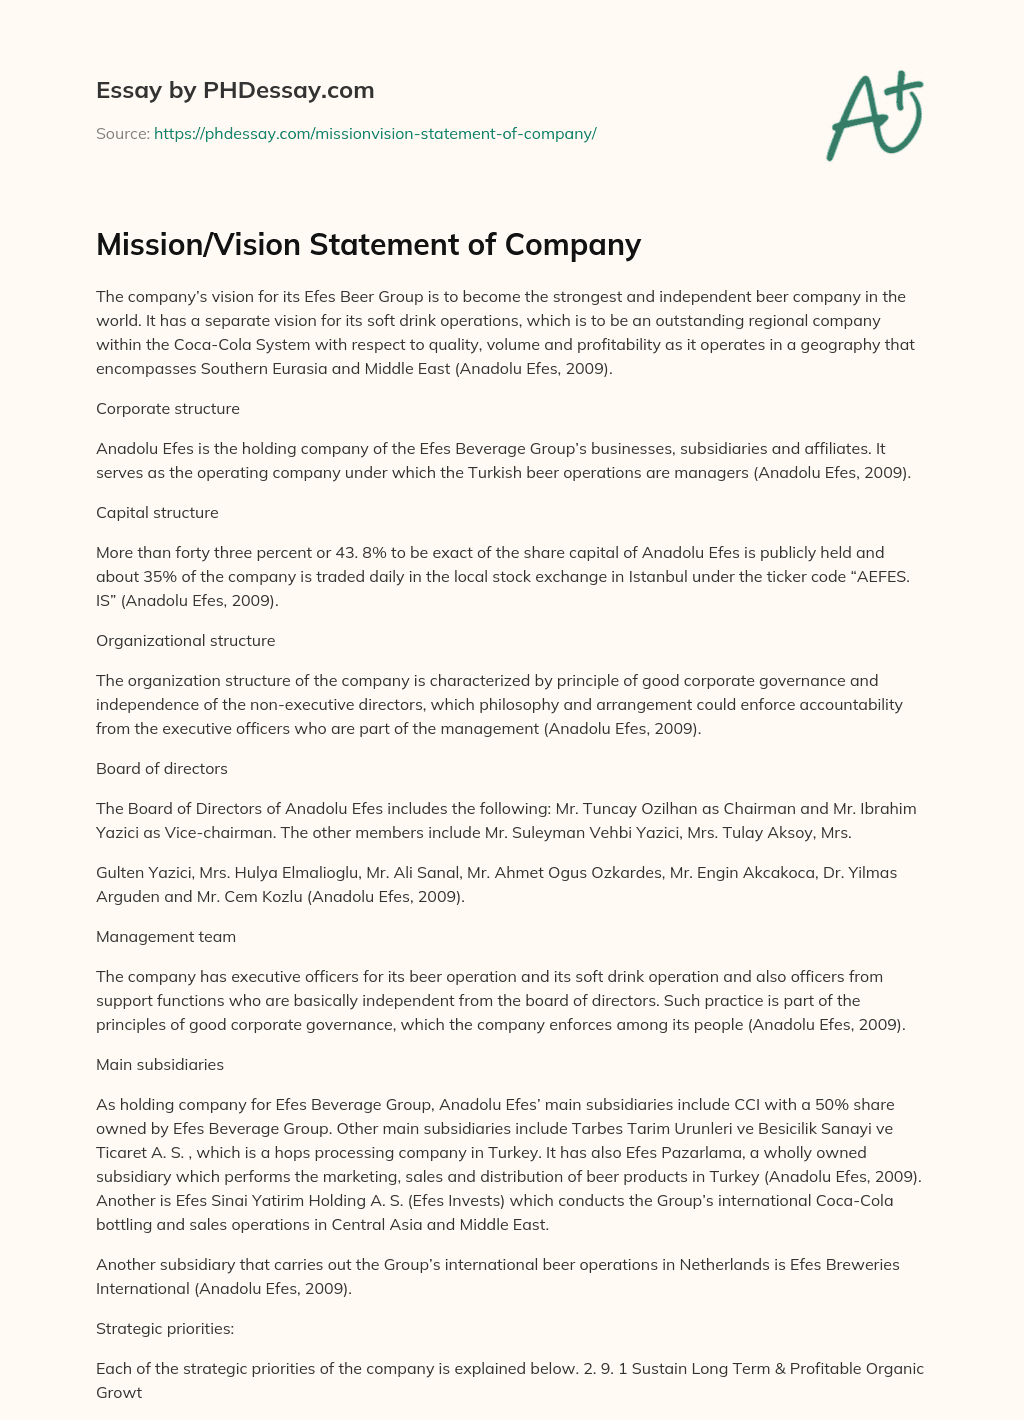 Mission/Vision Statement of Company essay